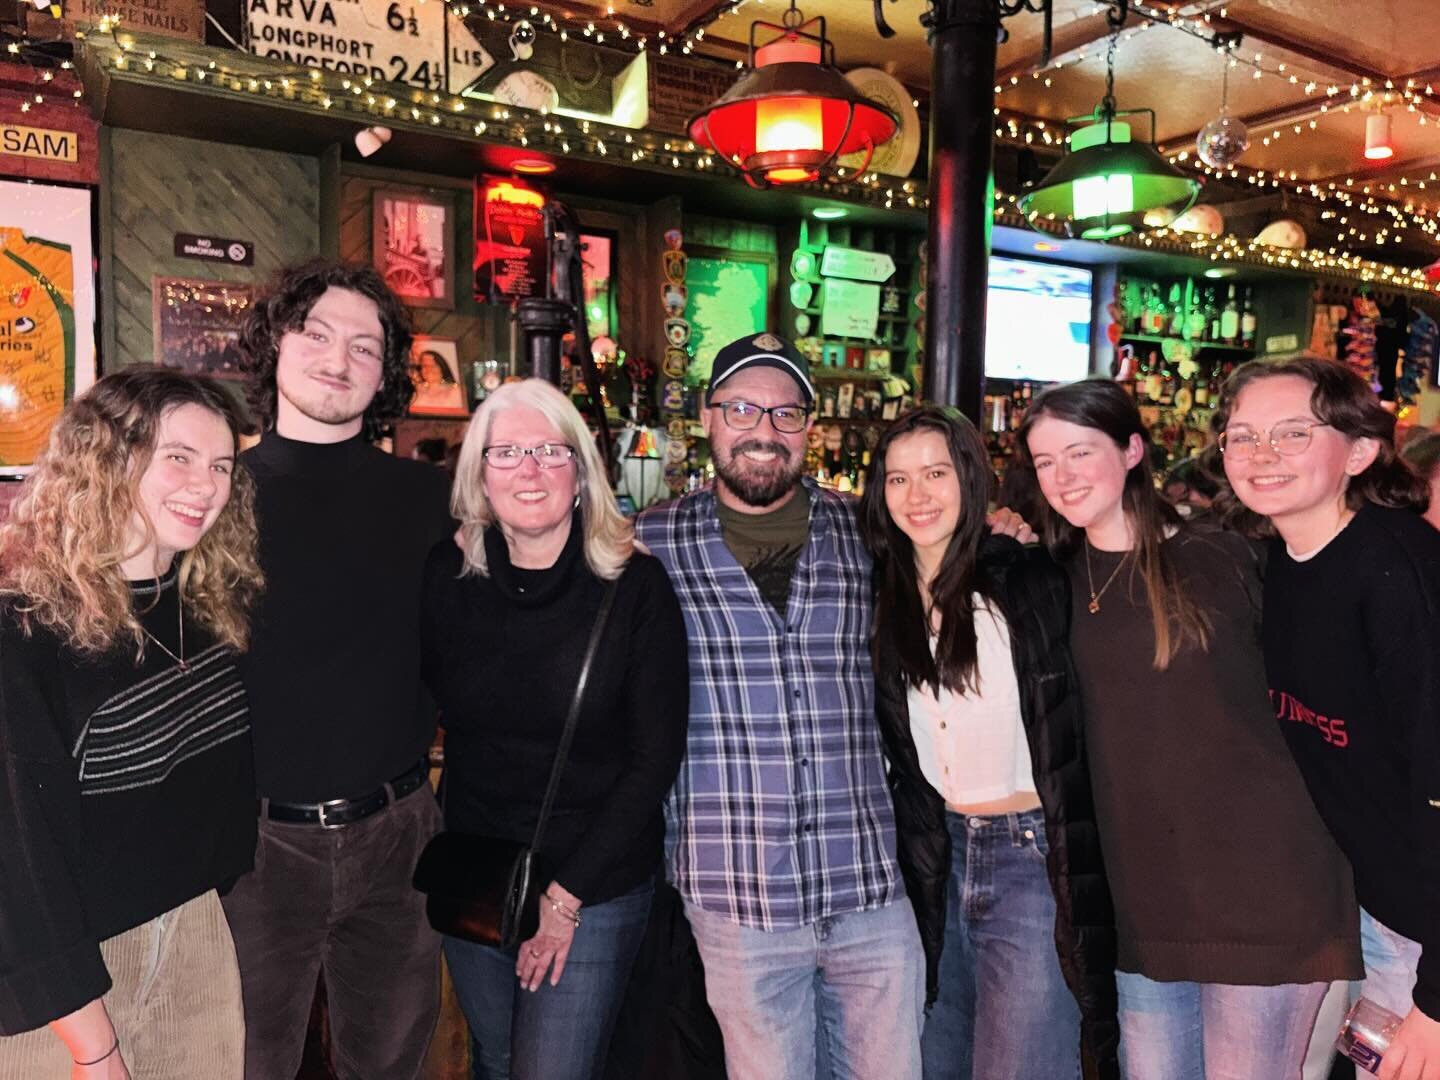 Teach t&aacute;bhairne c&eacute;anna, aghaidheanna nua&hellip;

🇮🇪 On Wednesday night, GAELTACHT NYC returned to Paddy Reilly&rsquo;s Music Bar for a Pop-Up Gaeltacht with record attendance!

🎵 Our Special Guest Seamus na Gaeilge (@seamusof69), a 